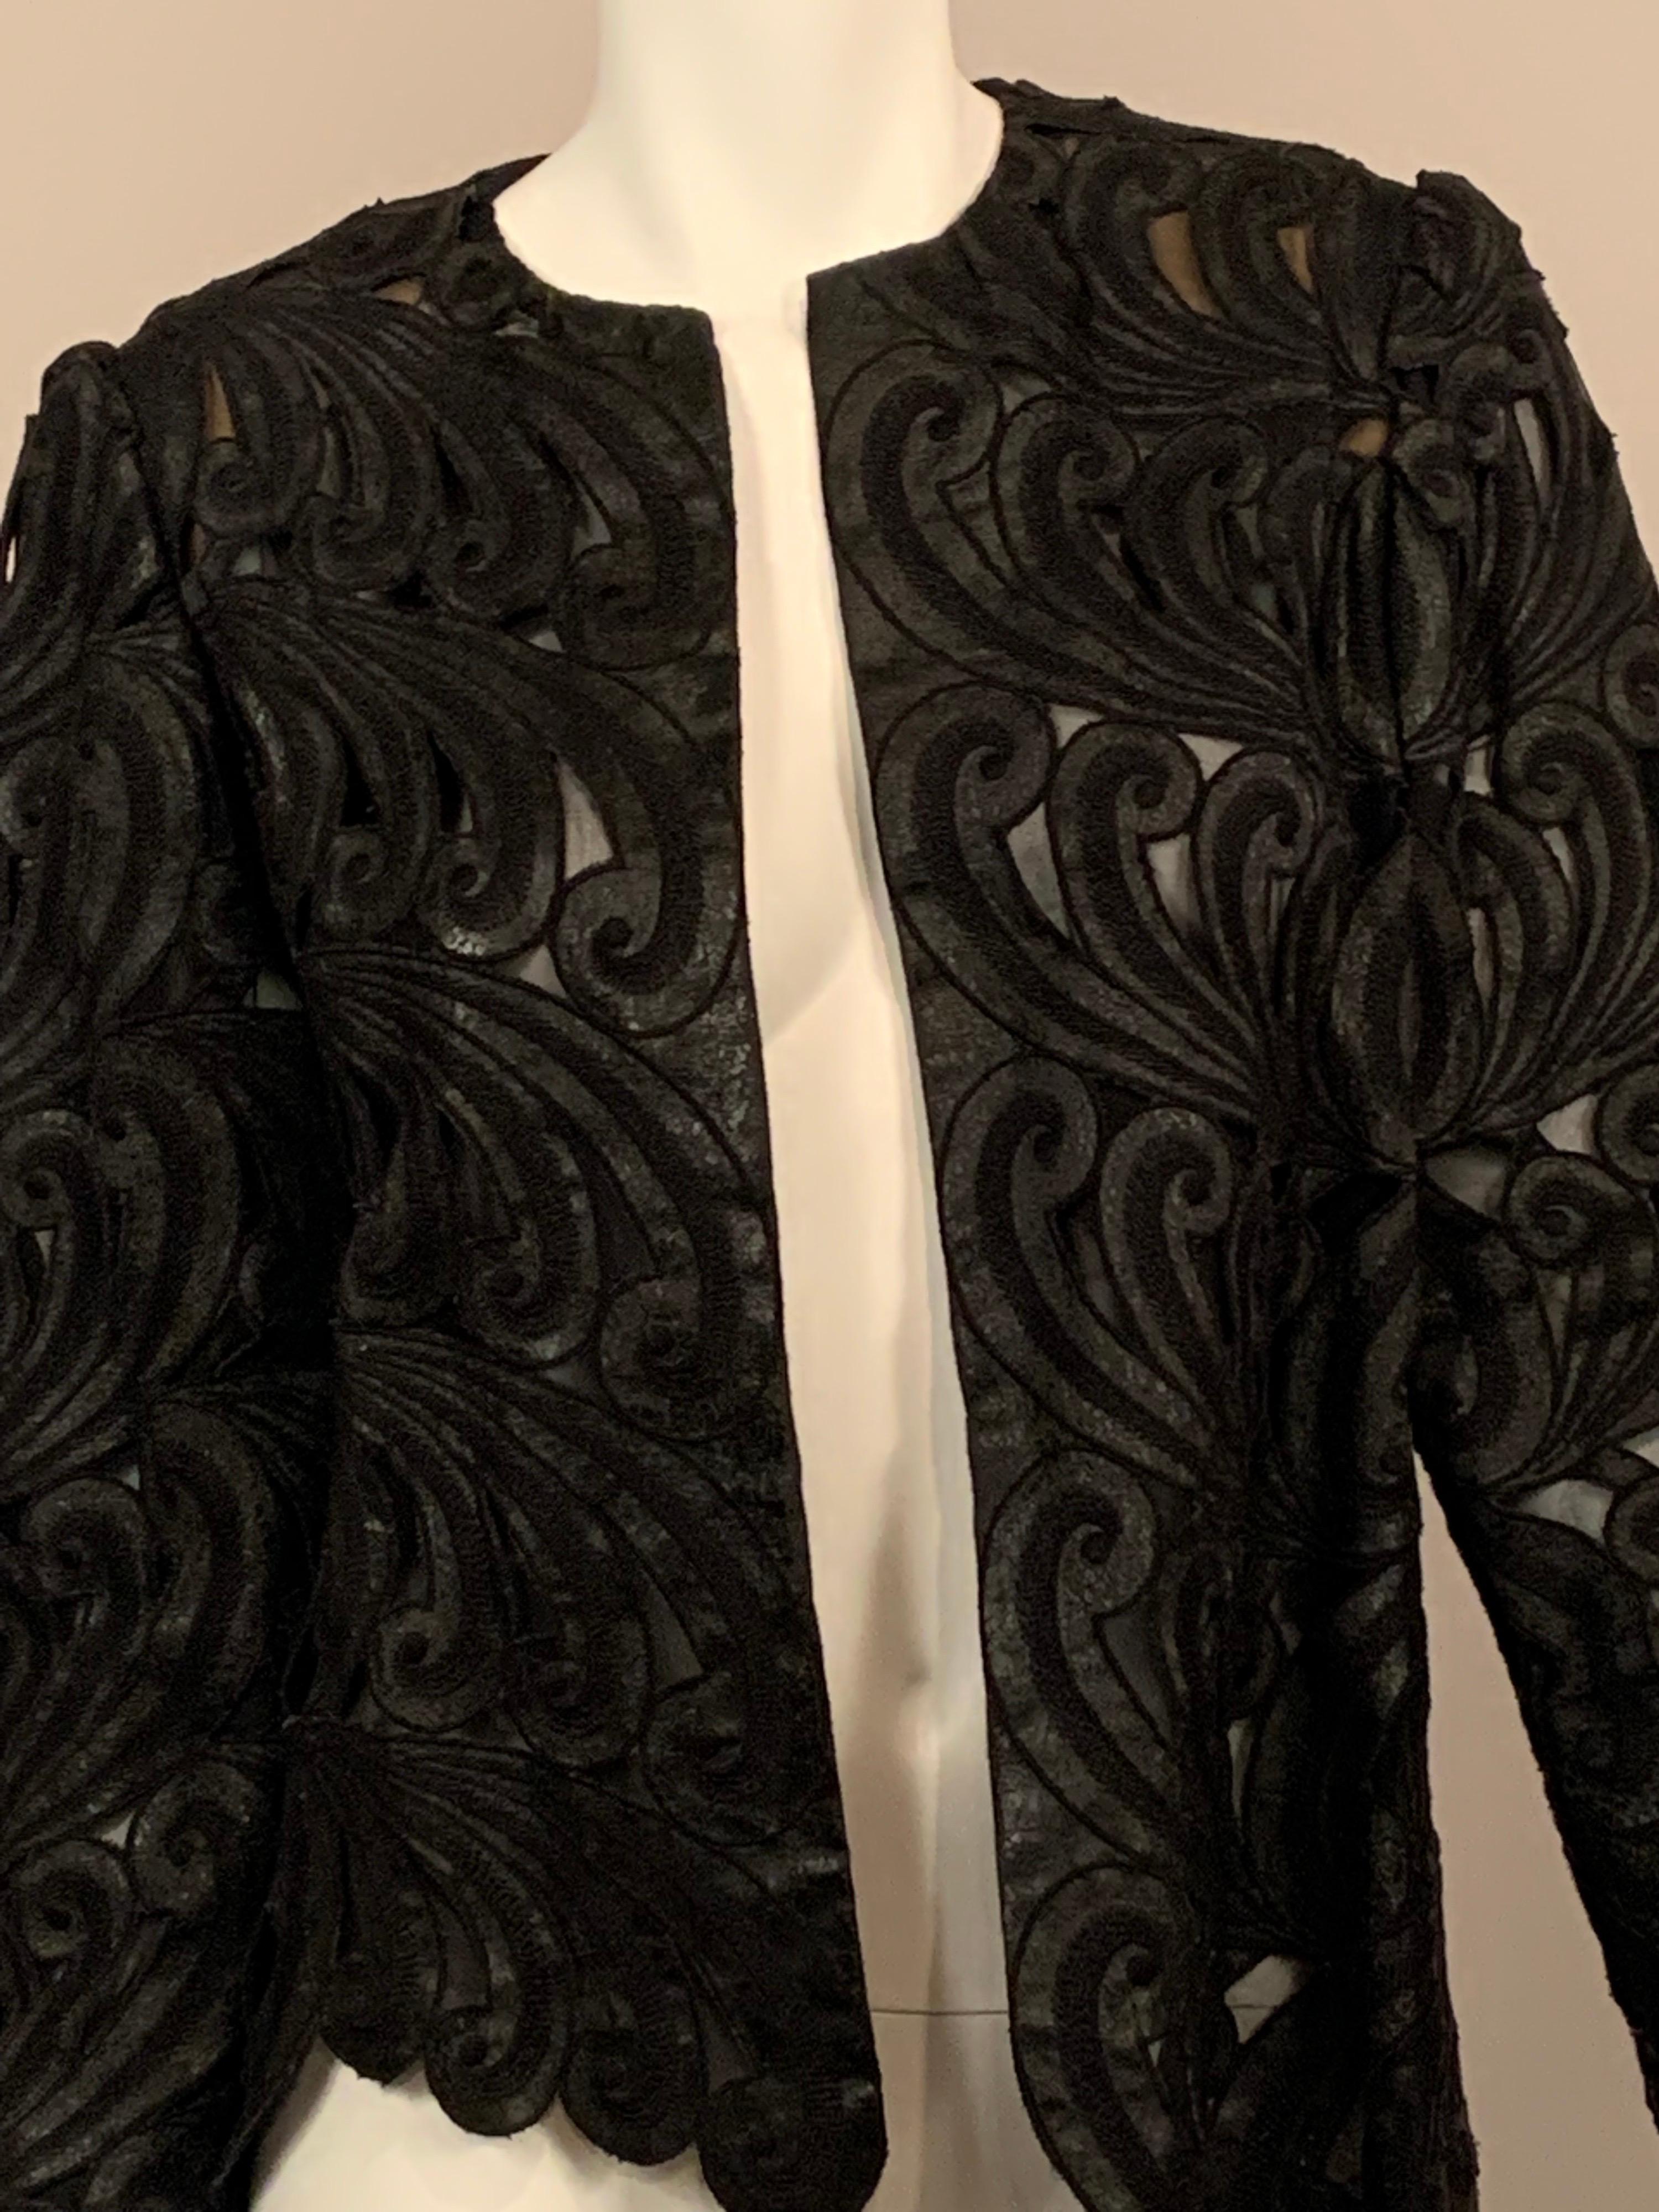 Comma shaped leather motifs are embroidered and distressed and they swirl in opposing directions against a background of sheer black silk chiffon.   The jacket is collarless and there no closures, just an easy piece to slip into. 
There are small